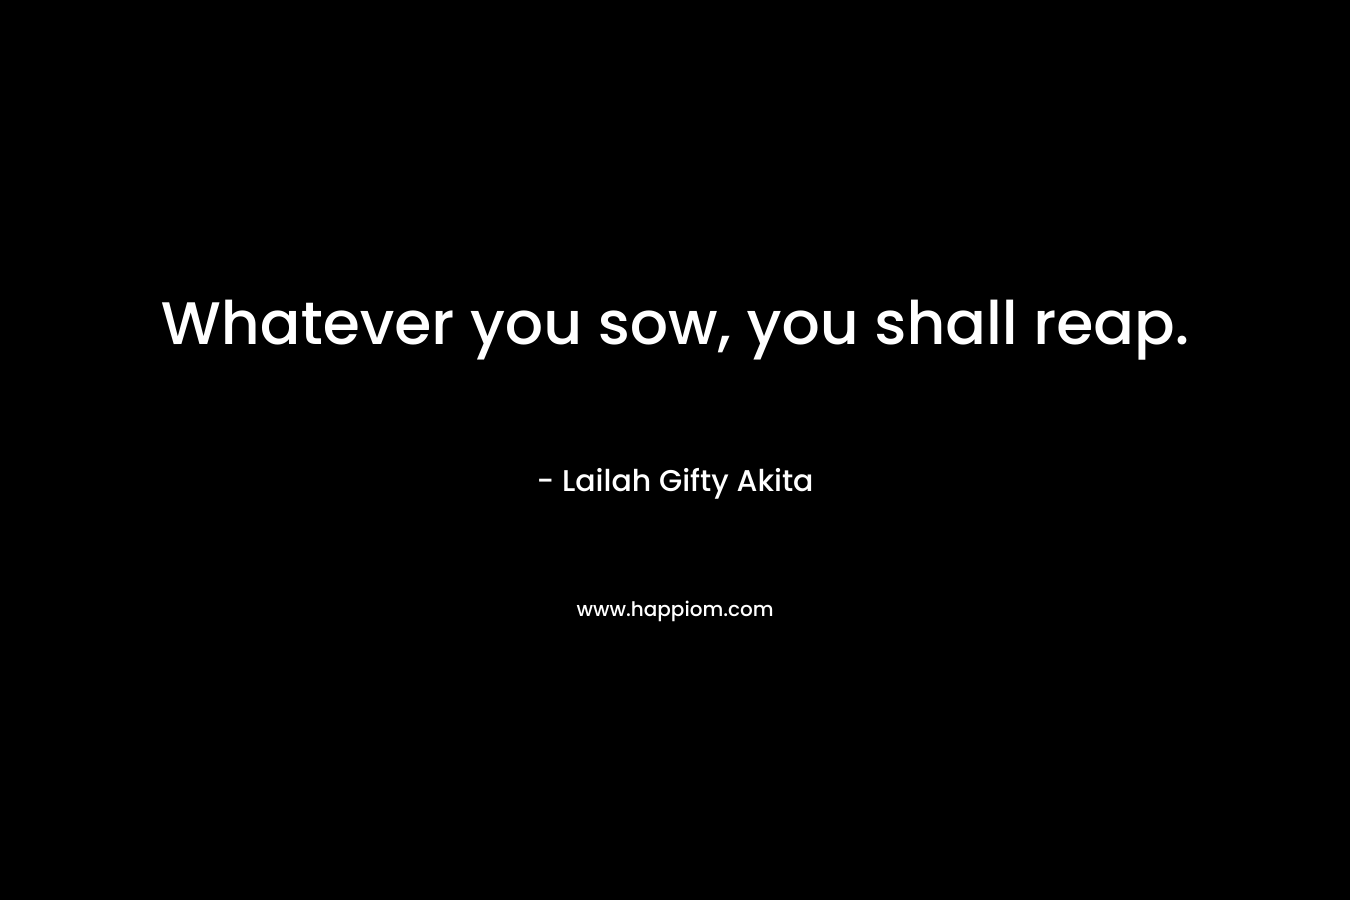 Whatever you sow, you shall reap. – Lailah Gifty Akita